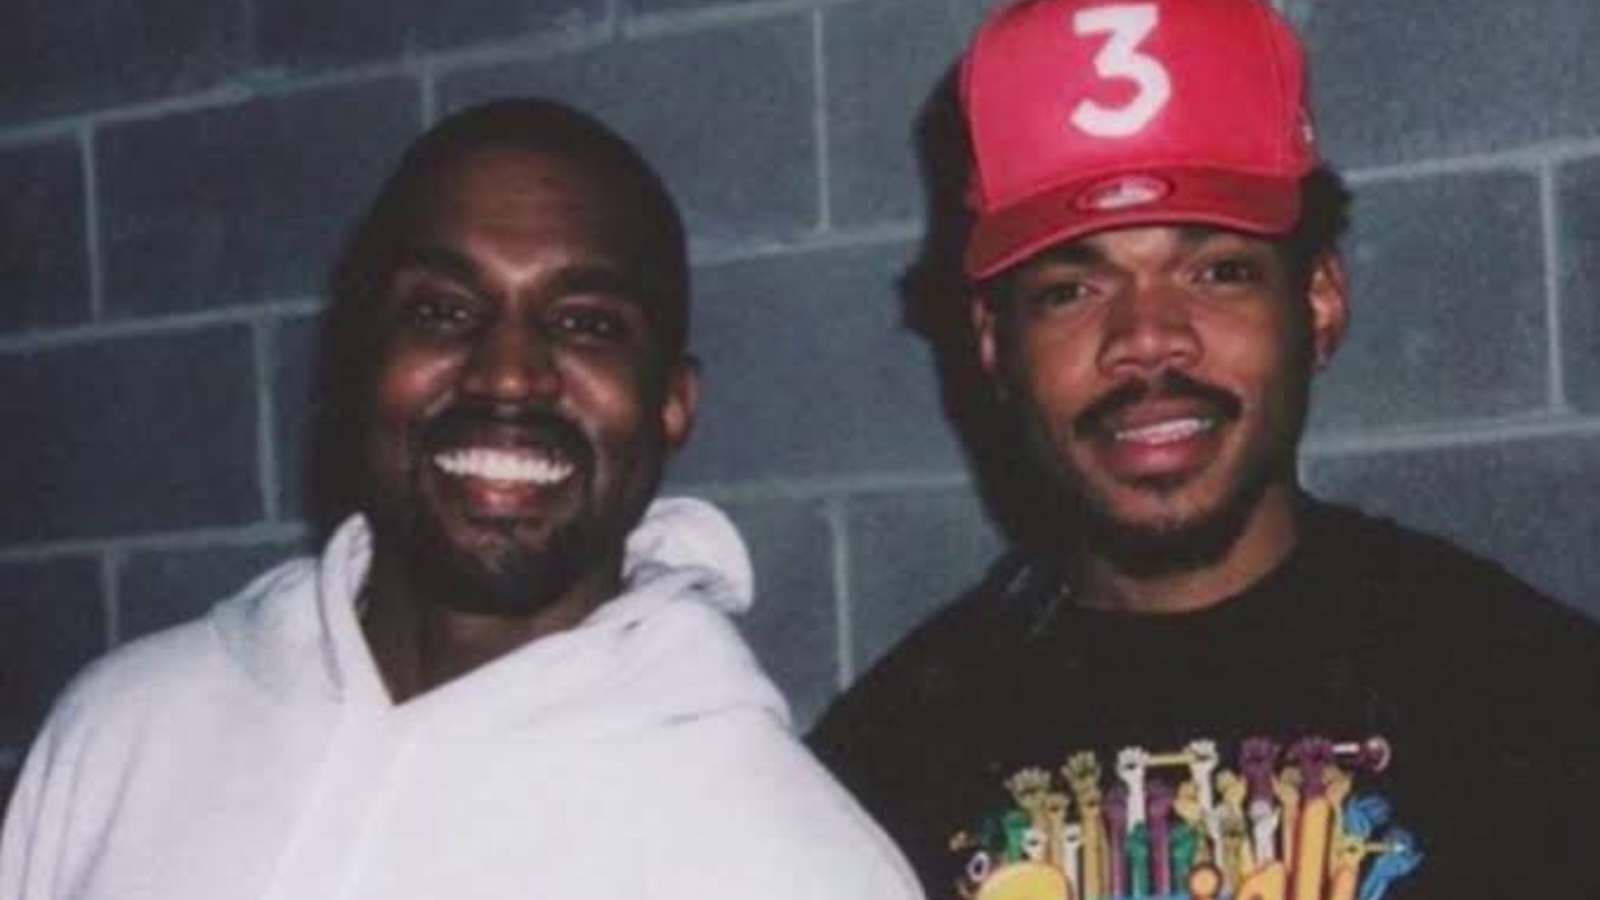 Chance the rapper and Kanye West